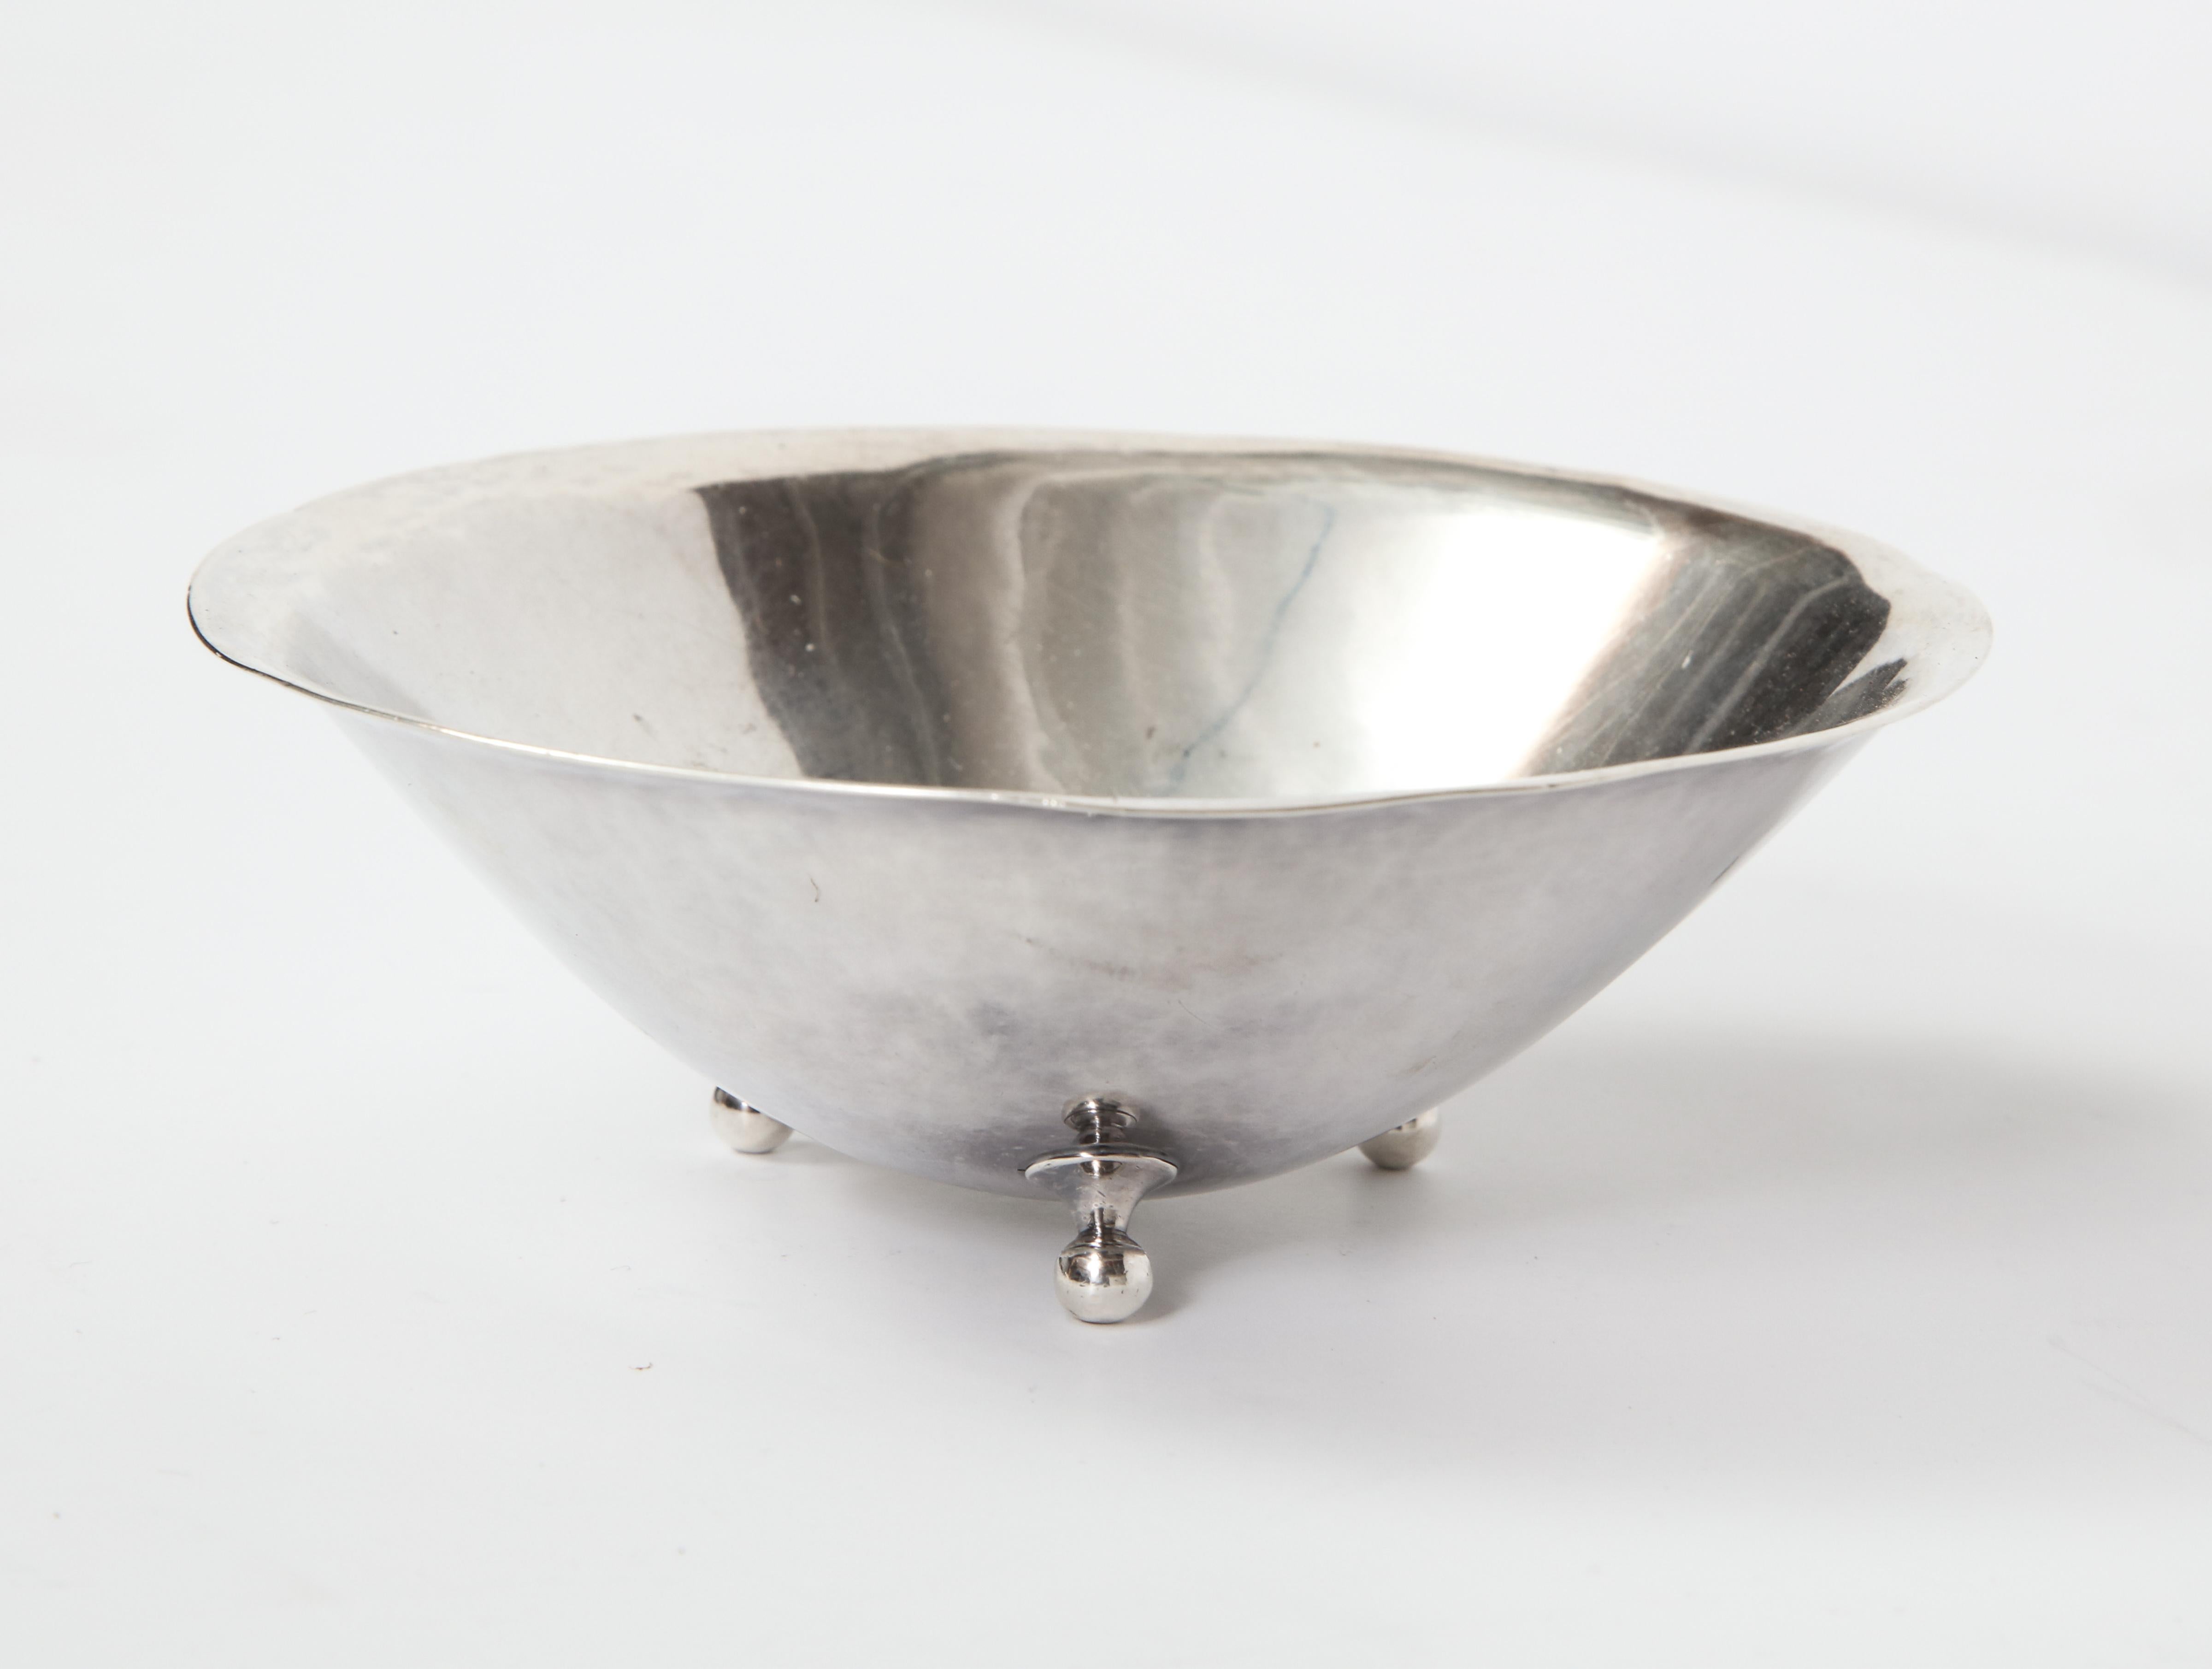 Danish sterling silver footed dish, circa 1950s. Hallmarked Forssen sterling on bottom.